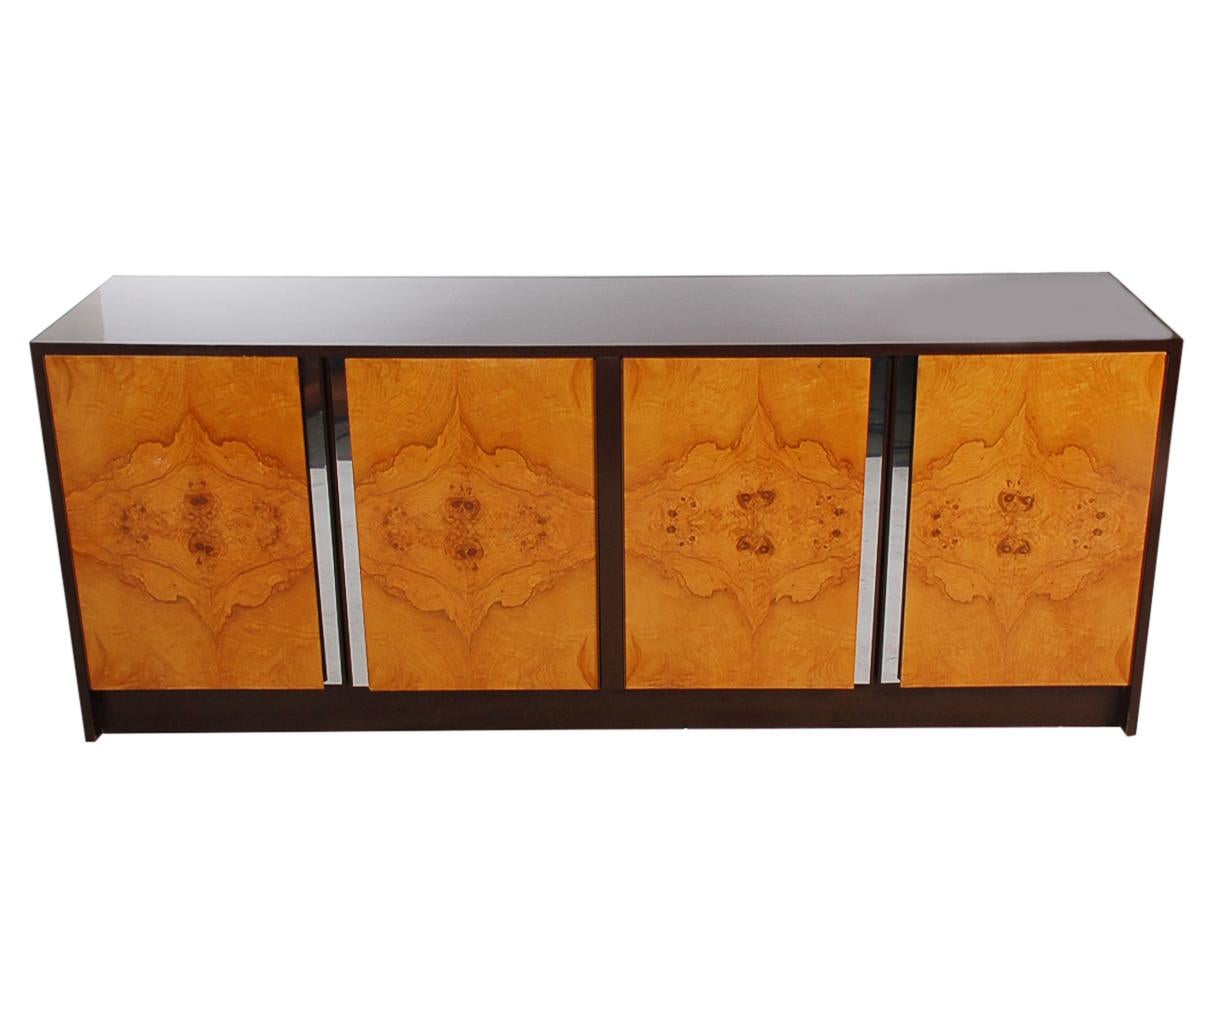 A handsome looking 4-door credenza in the manner of Milo Baughman or Pierre Cardin, circa 1970s. It features a glossy chocolate brown case with beautiful contrasting olive burl doors.